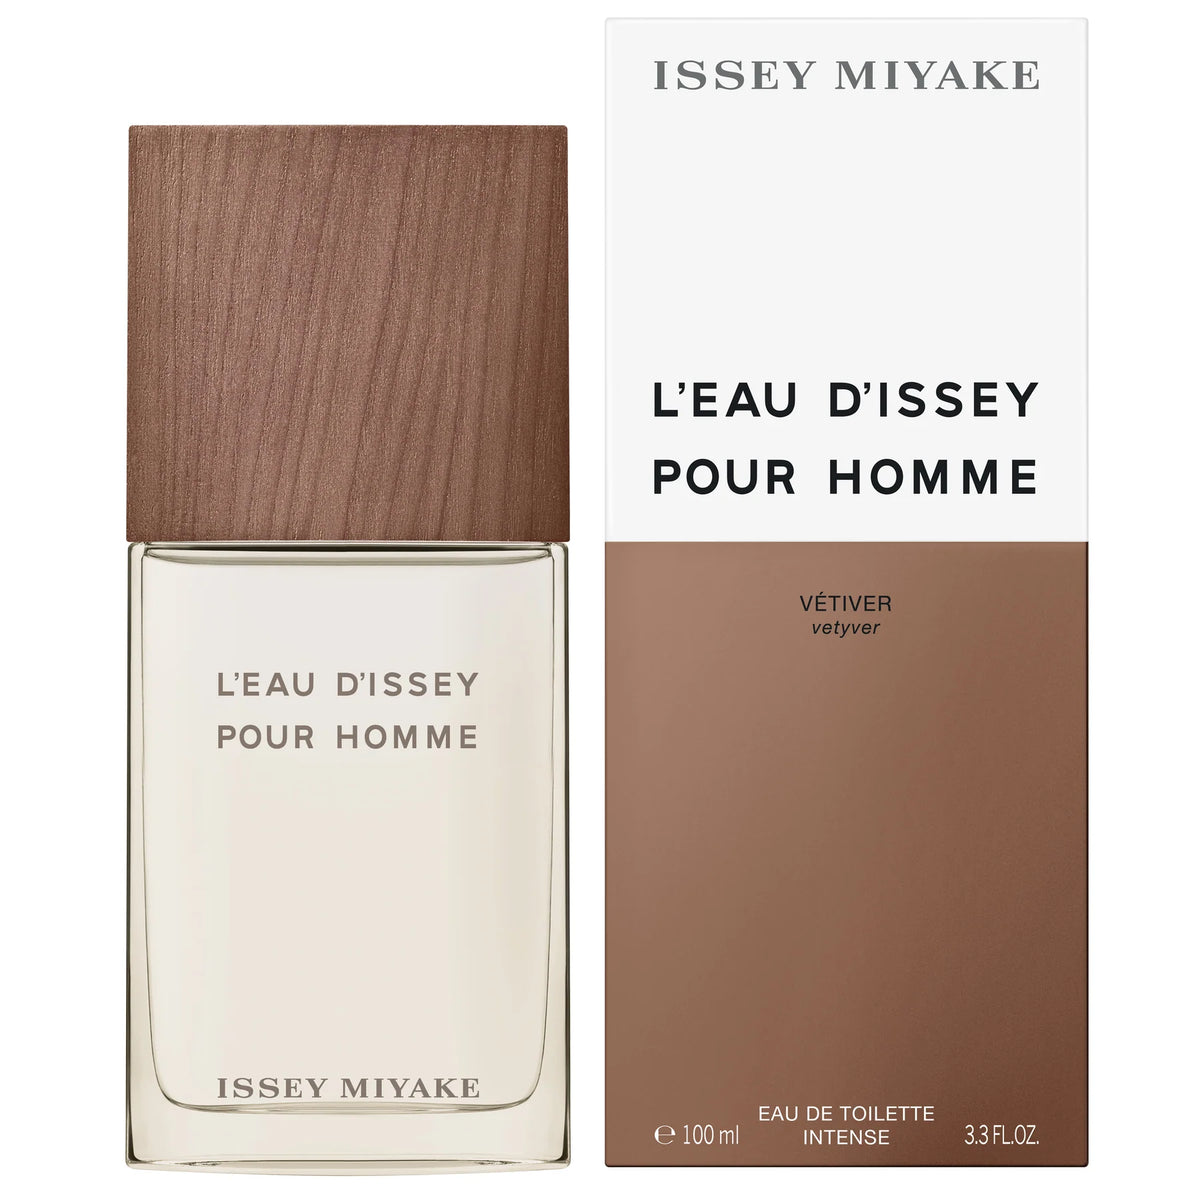 Issey Miyake L’Eau d’Issey Vetiver Pour Homme - EDT Intense - 100ml